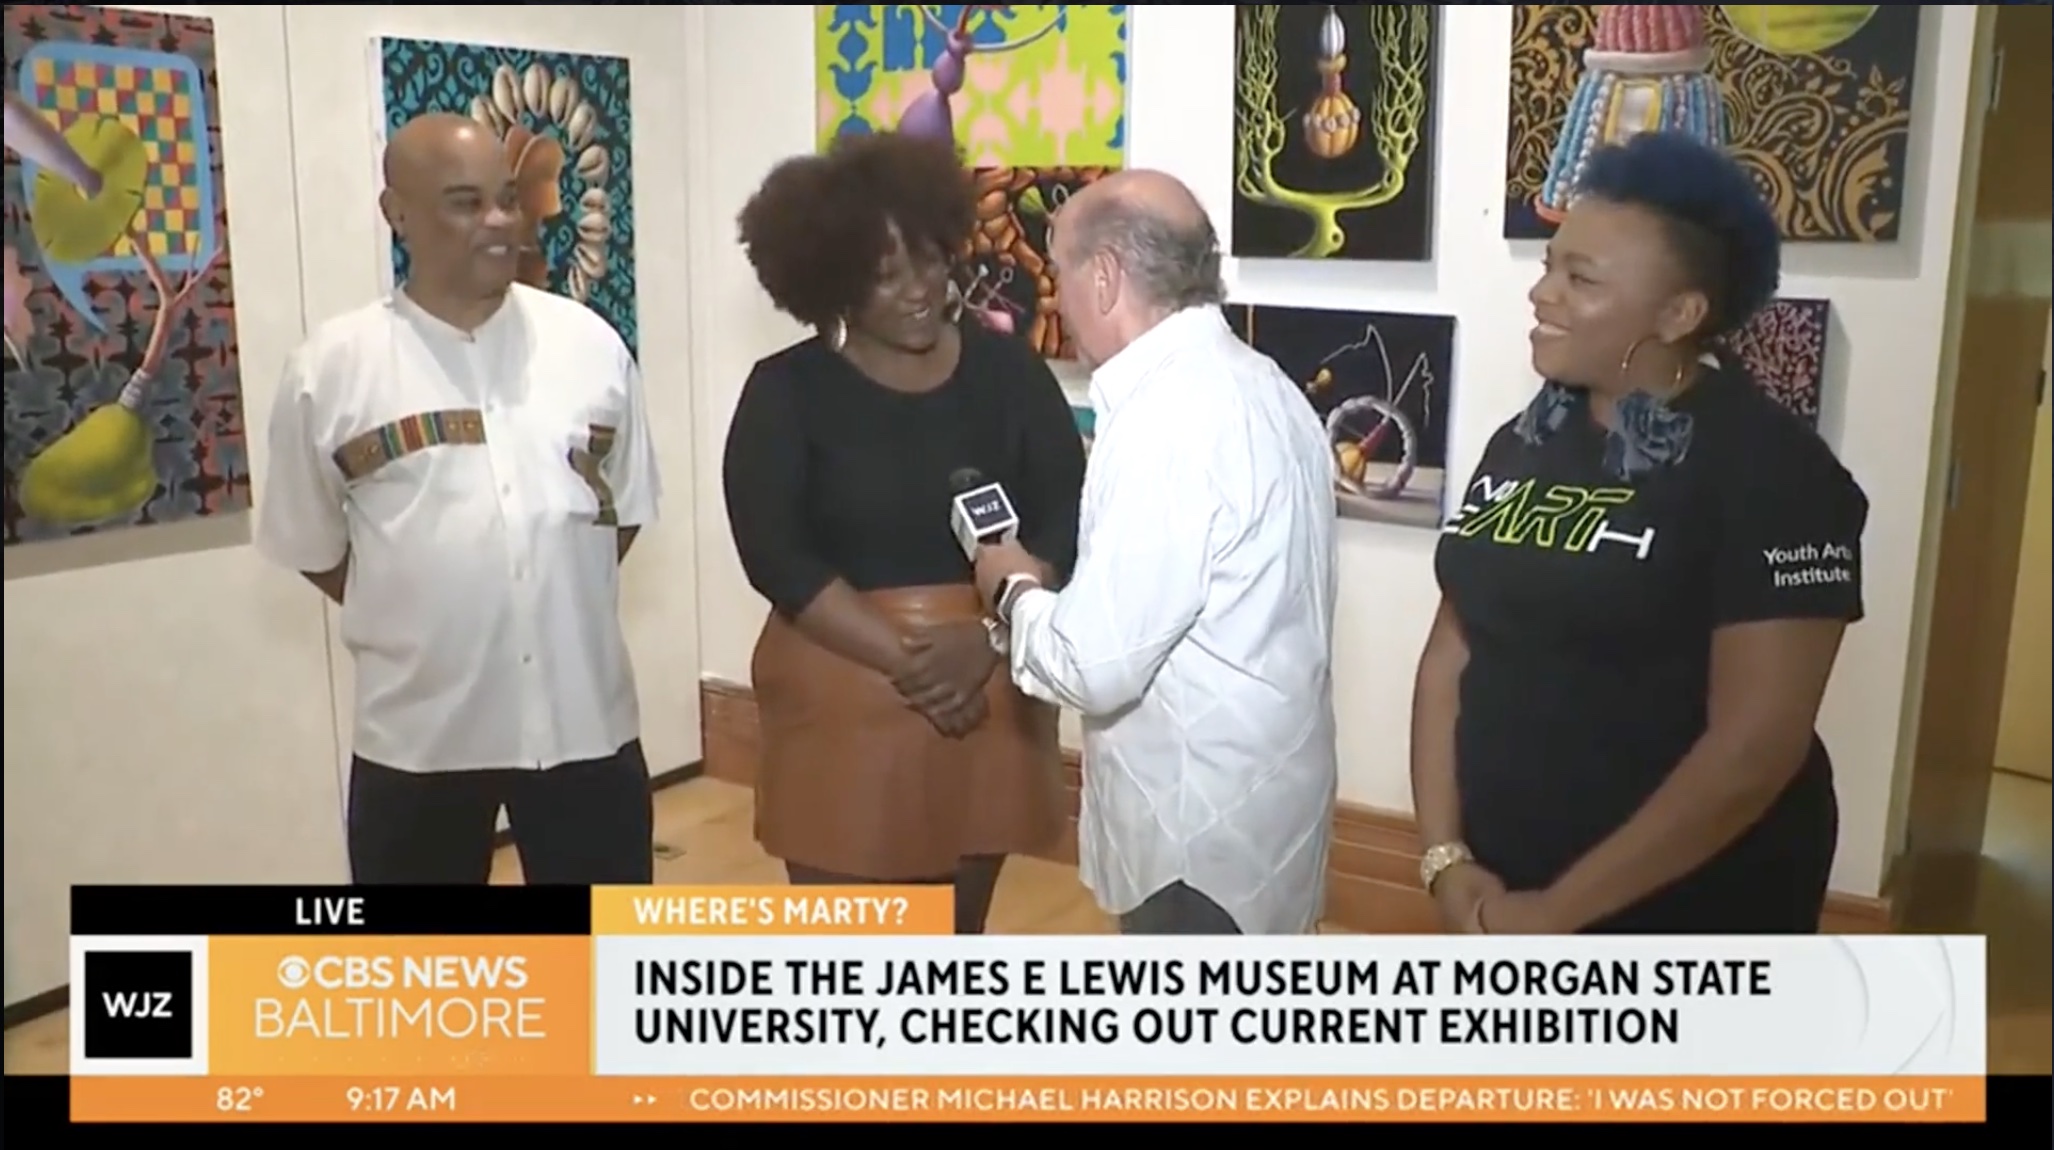 Where's Marty? Inside the James E. Lewis Museum at Morgan State